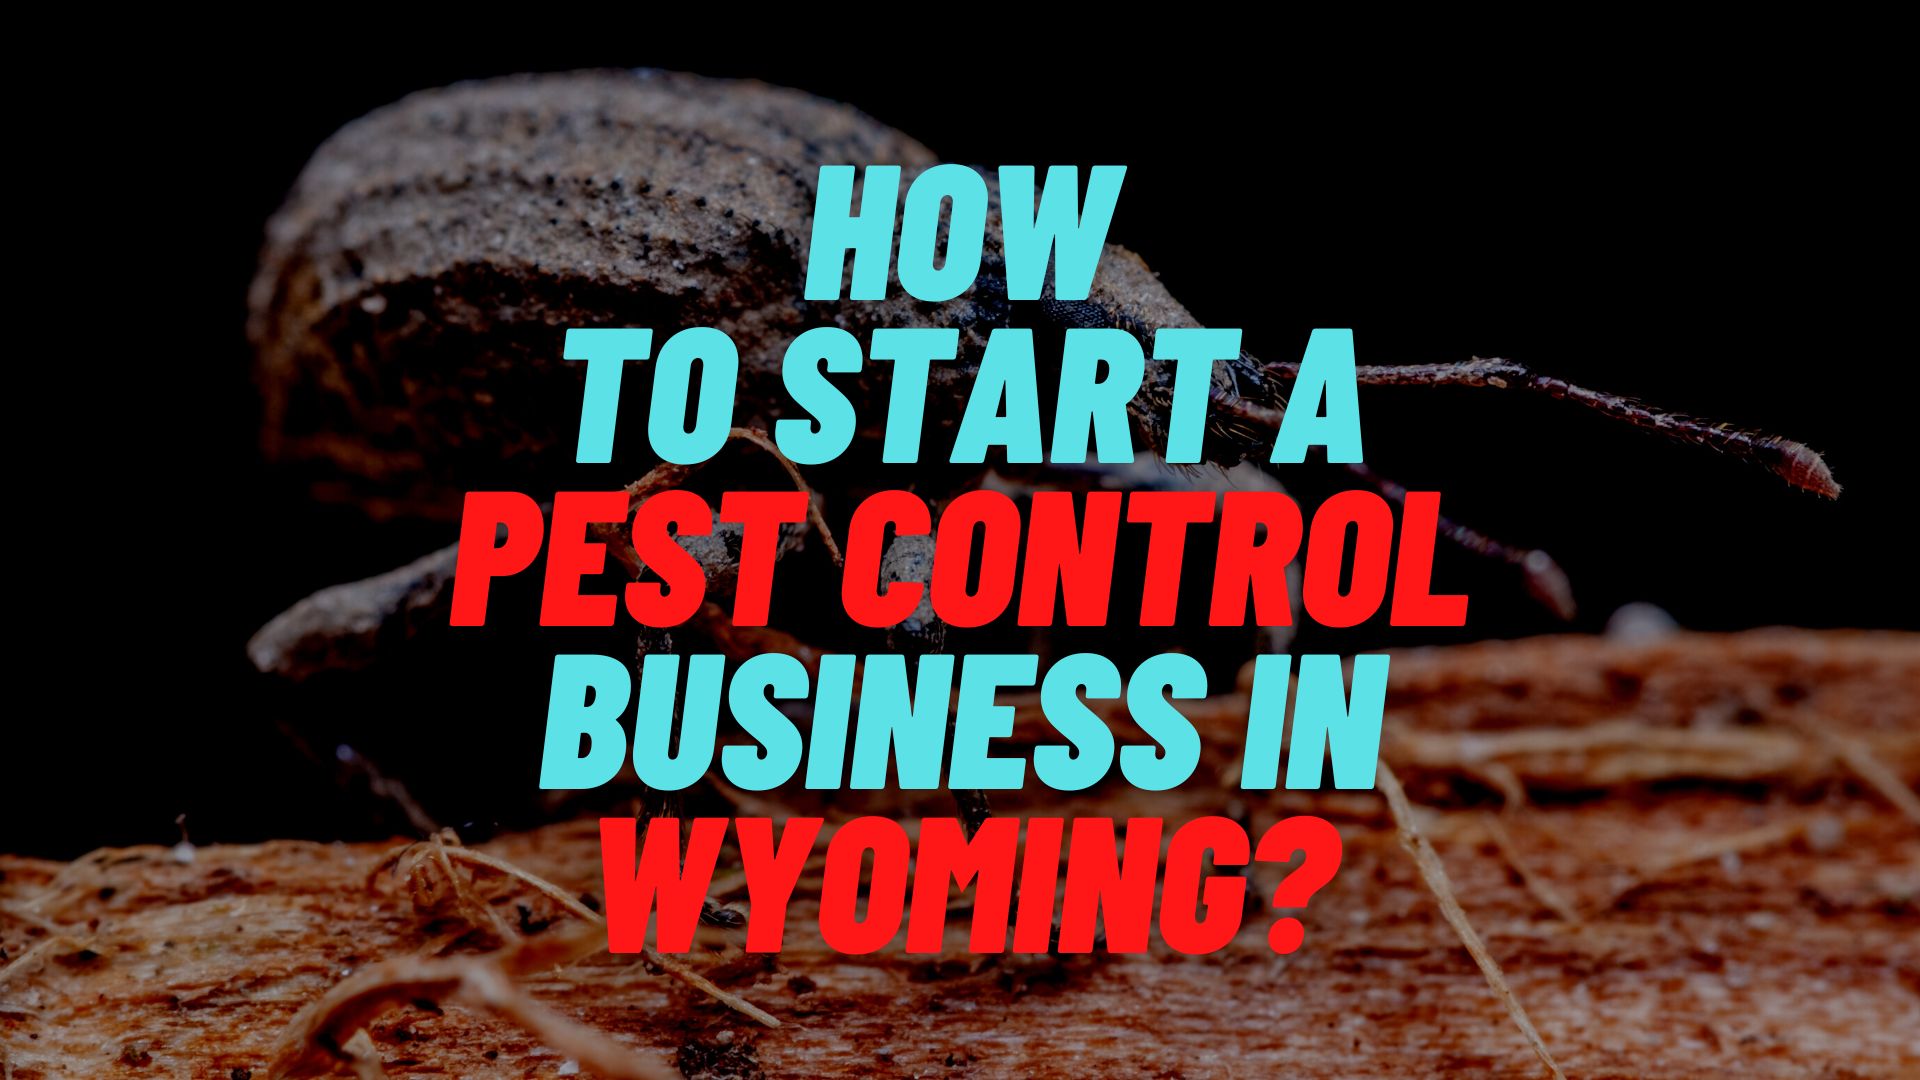 How to start a pest control business in Wyoming?